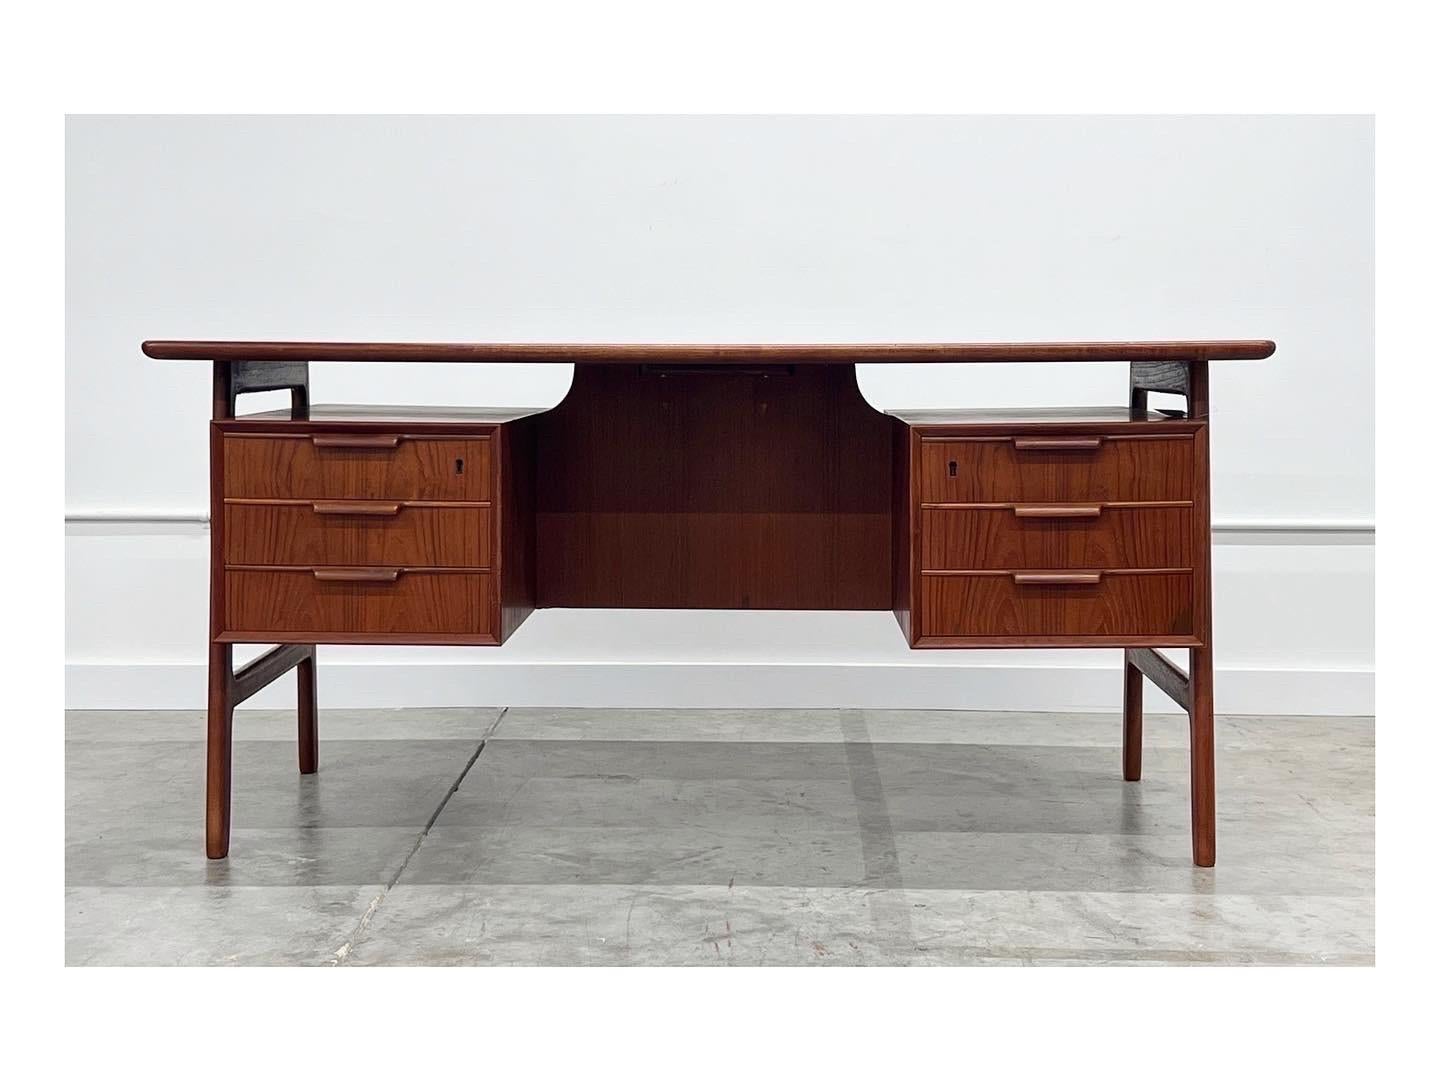 Mid-Century Modern model 75 teak desk by Gunni Omann for Omann Jun Møblefabrik. Floating desk with finished bookcase and compartment for storage on the back, could be easily floated in a room. Amazing legs and six smooth drawers on the front. Patina